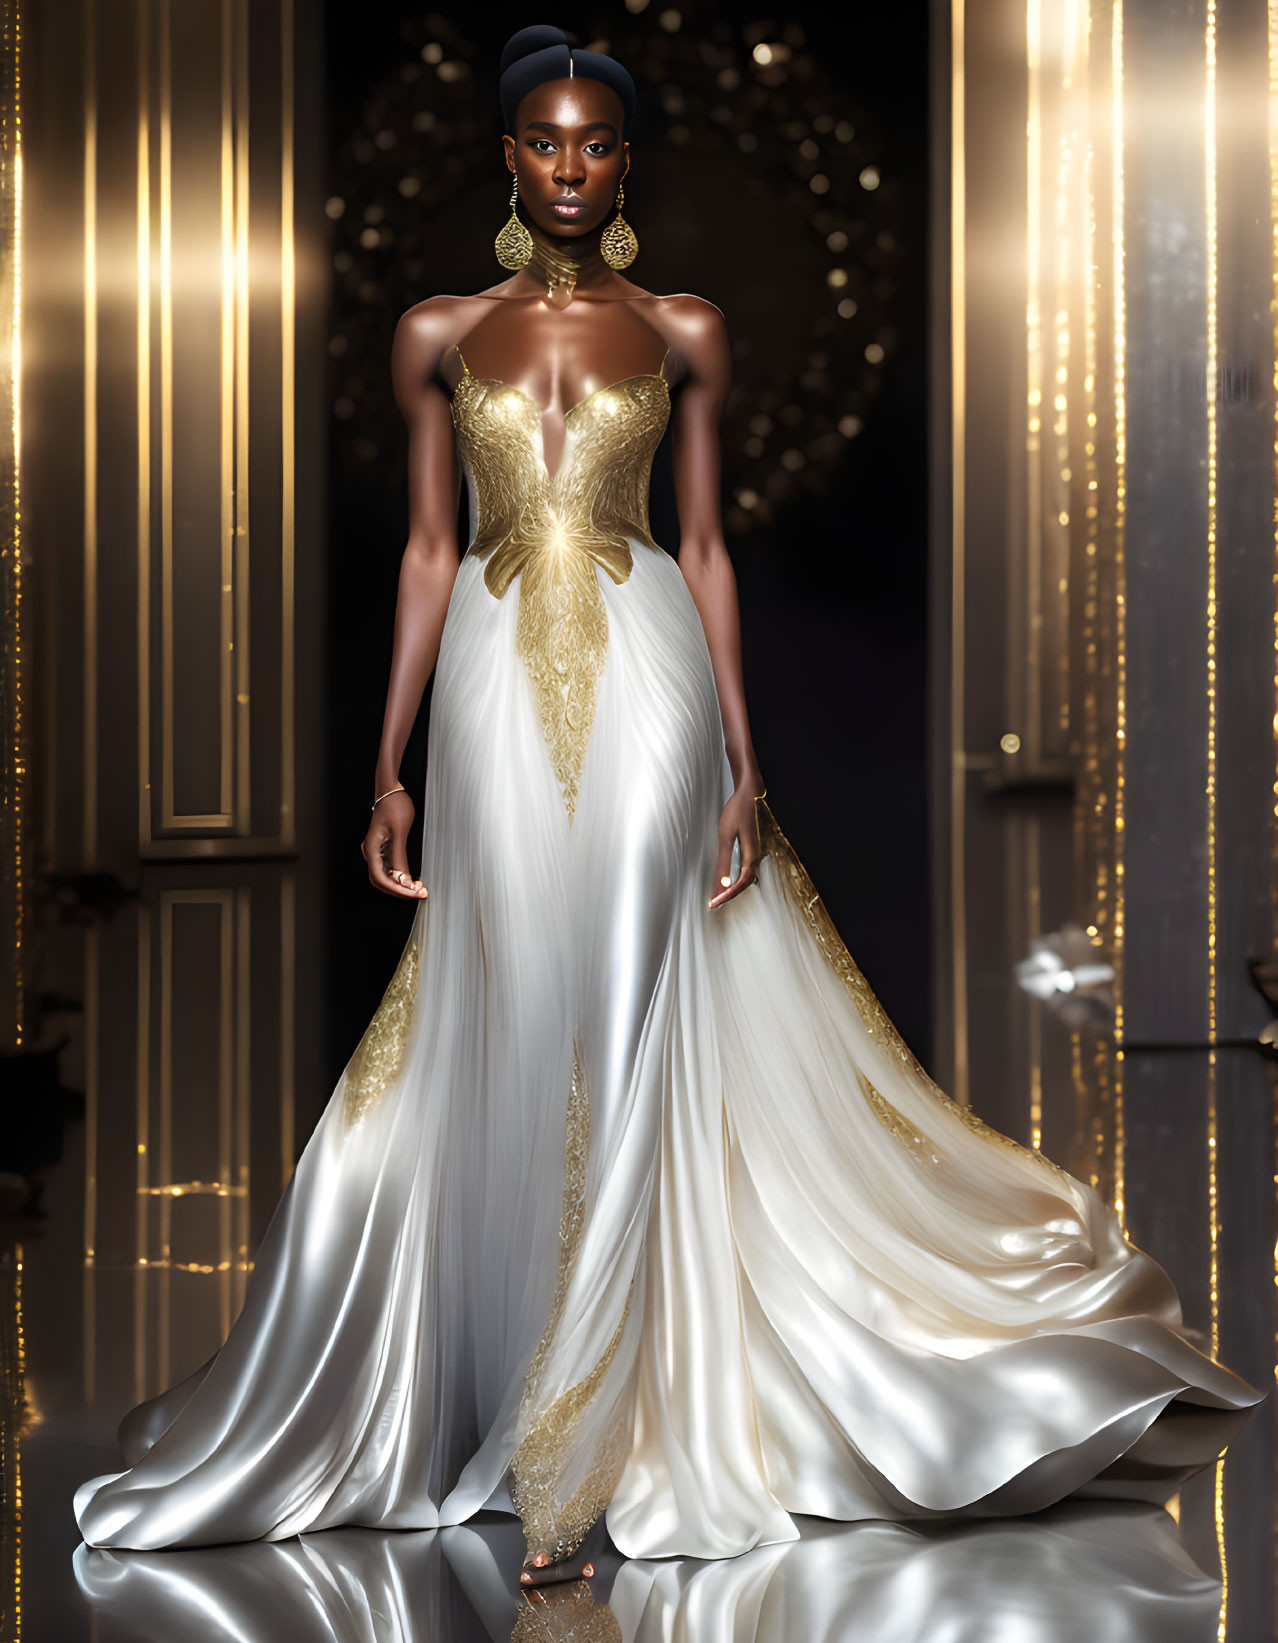 Luxurious White and Gold Evening Gown Illustration in Lavish Setting